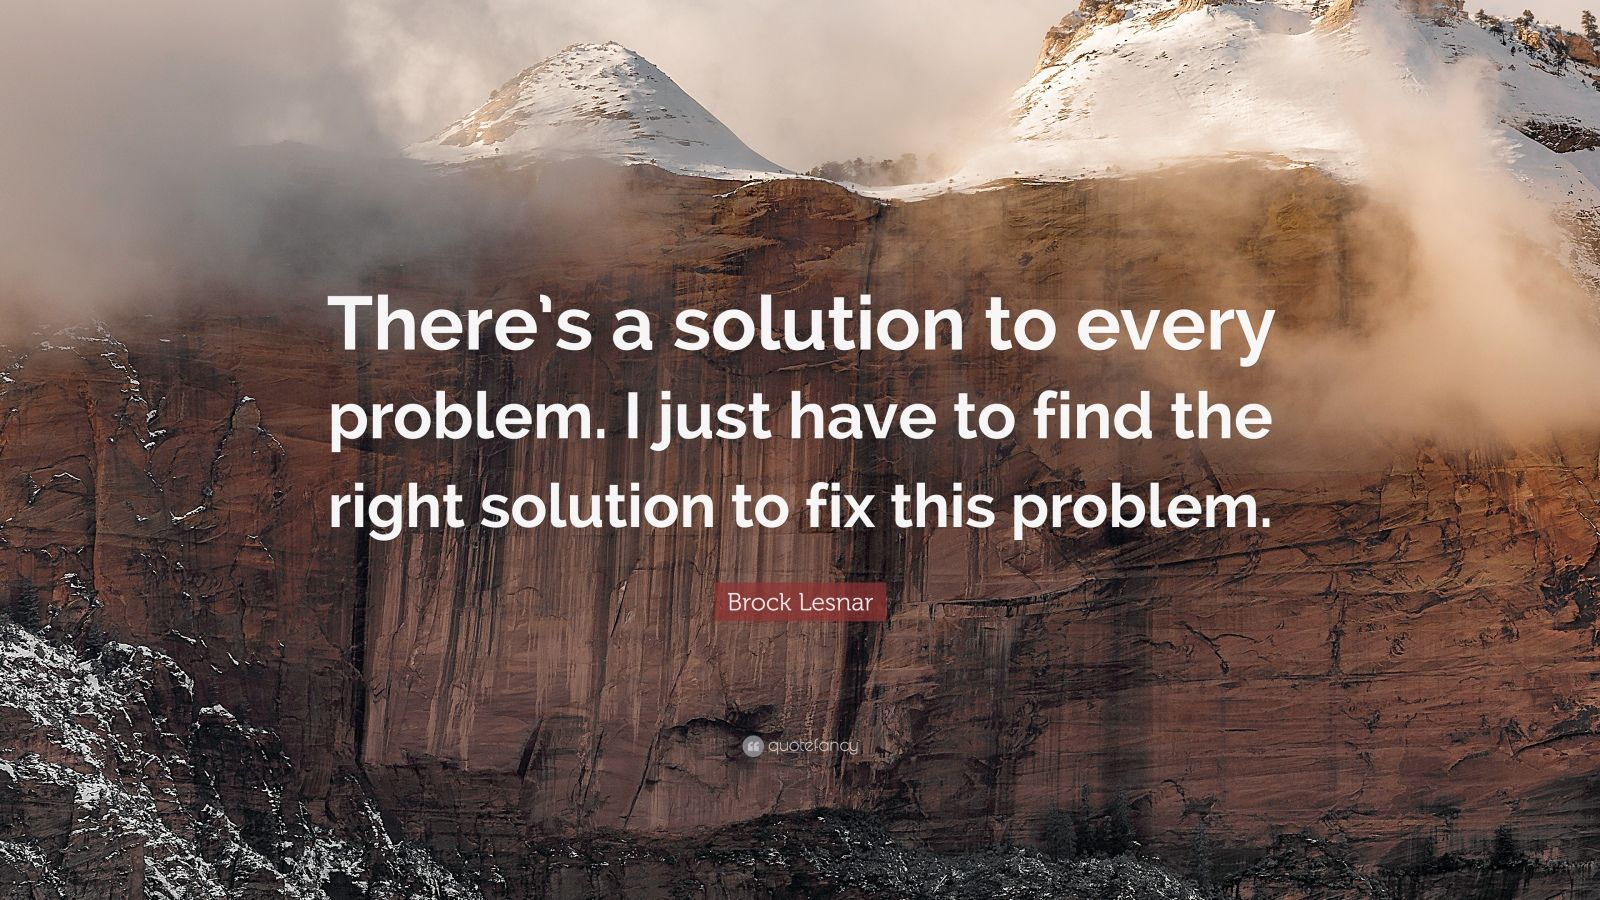 Brock Lesnar Quote: “There’s a solution to every problem. I just have ...